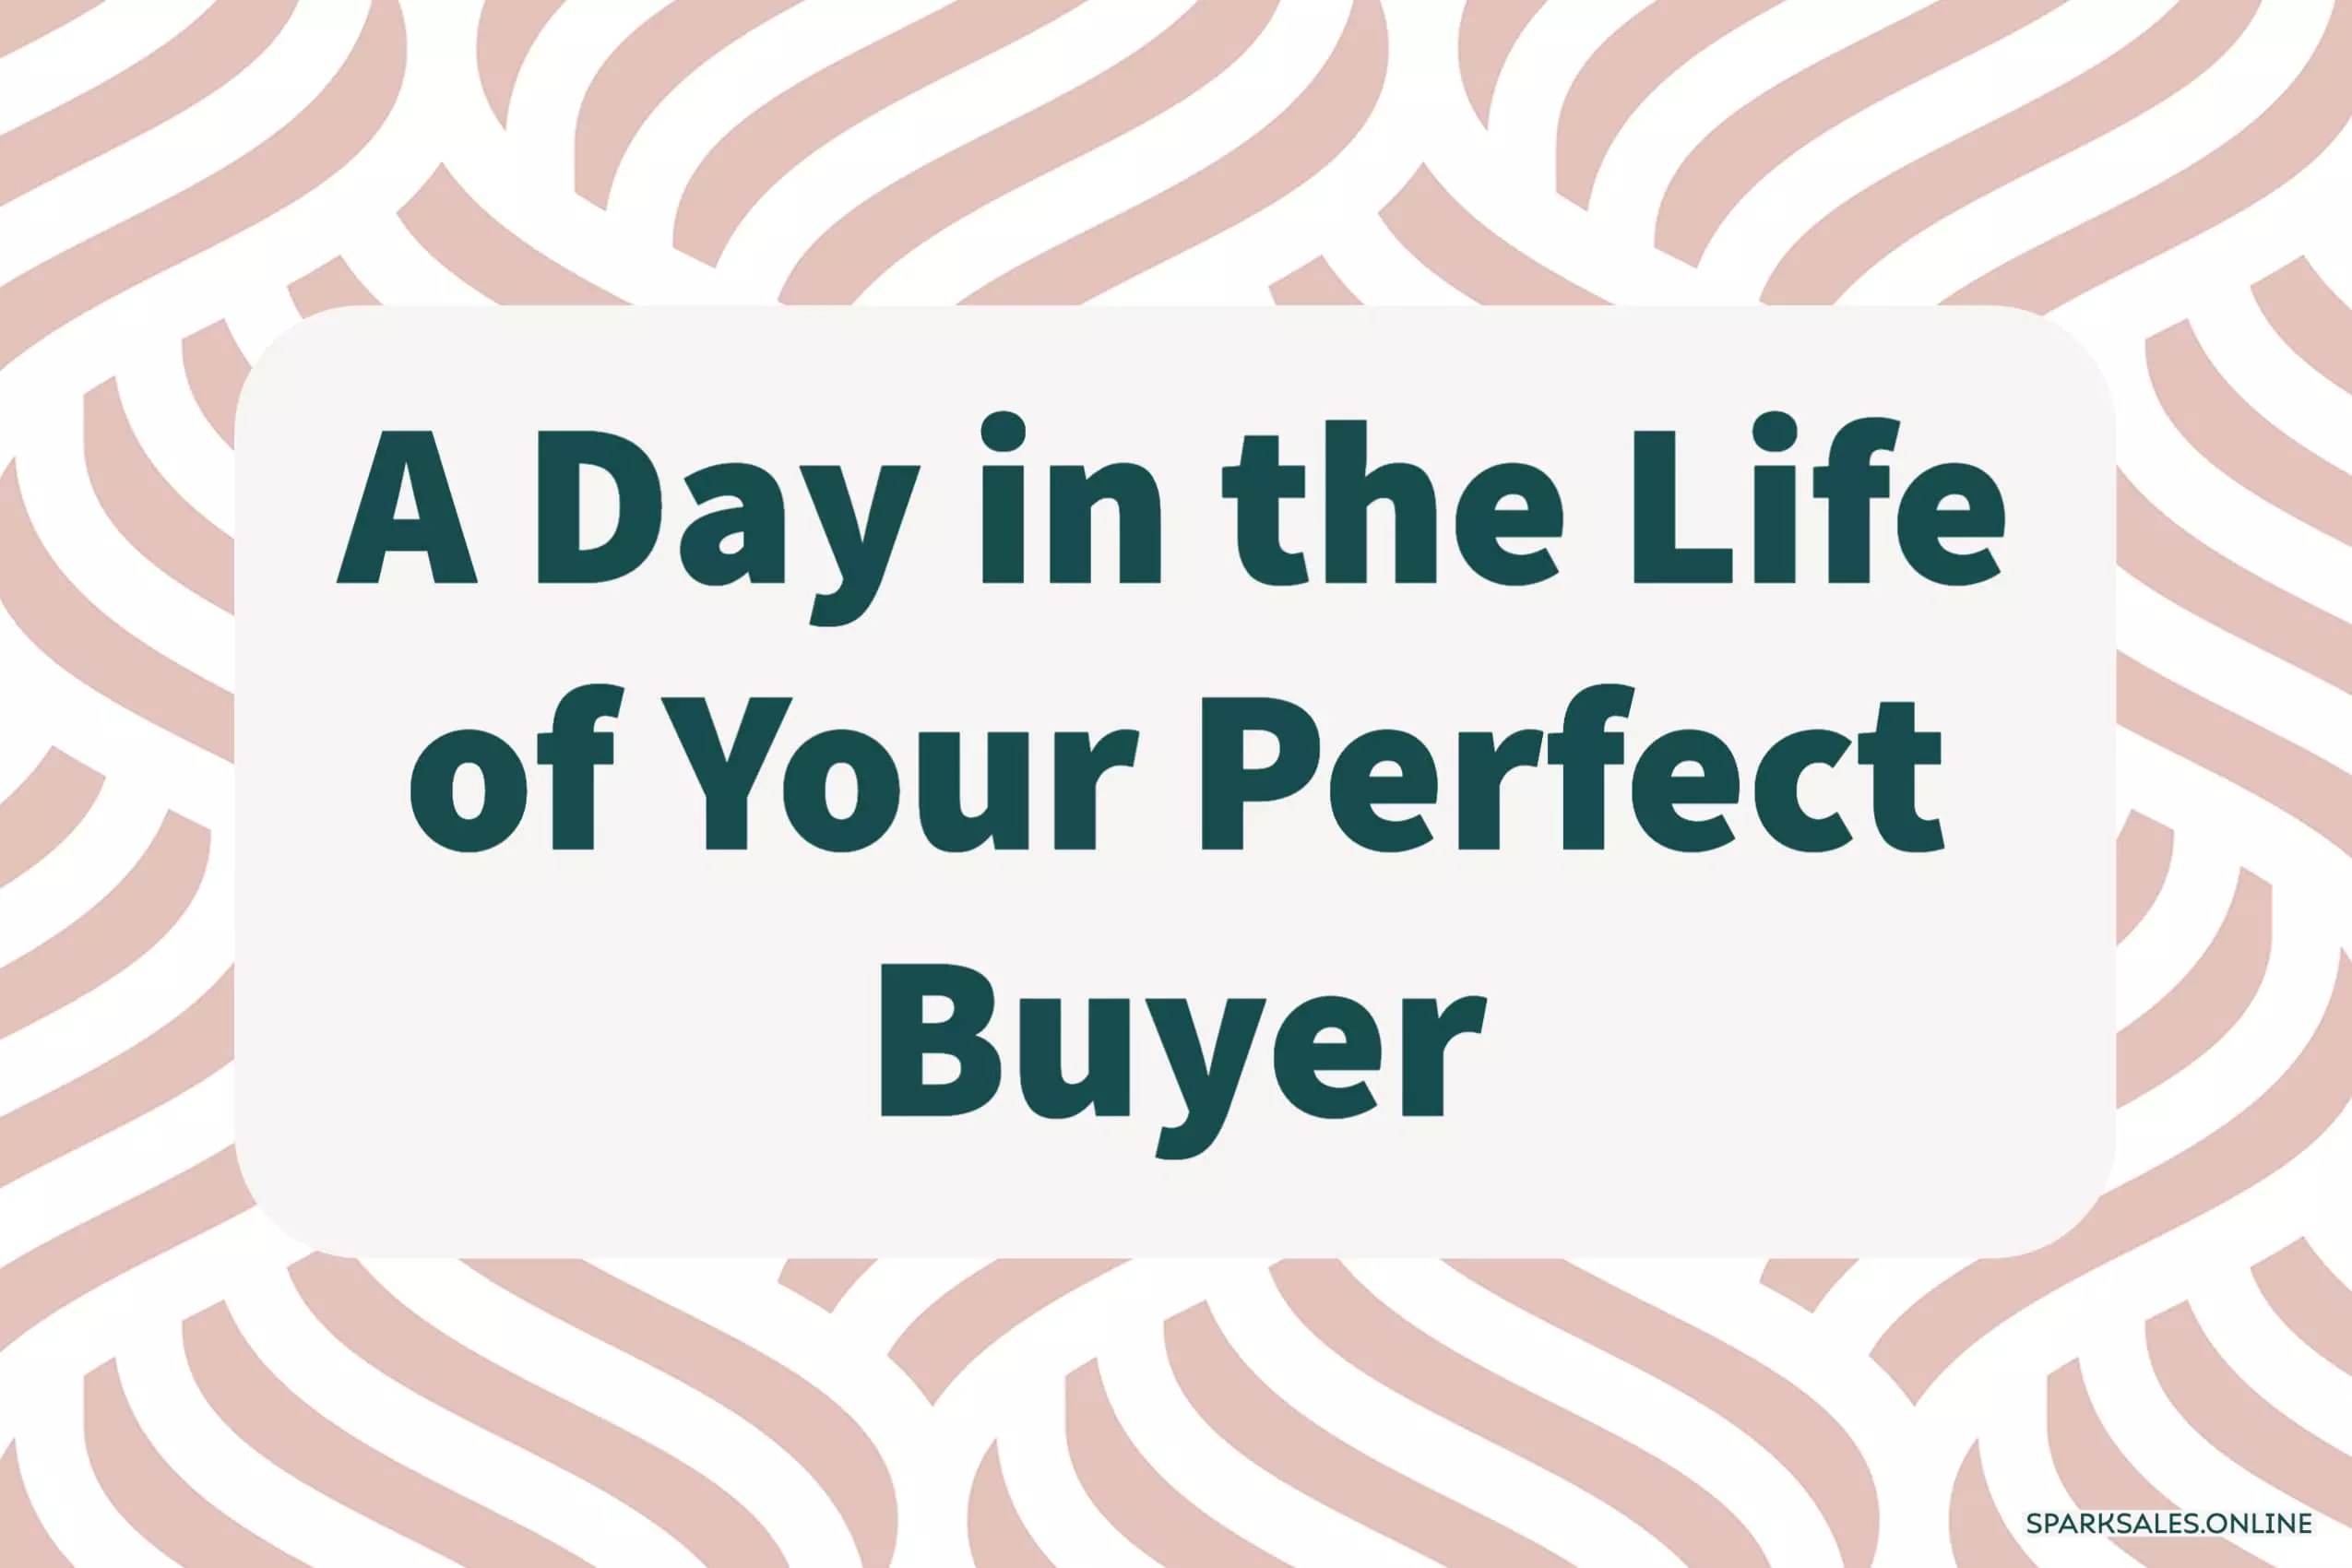 A day in the life of your perfect buyer